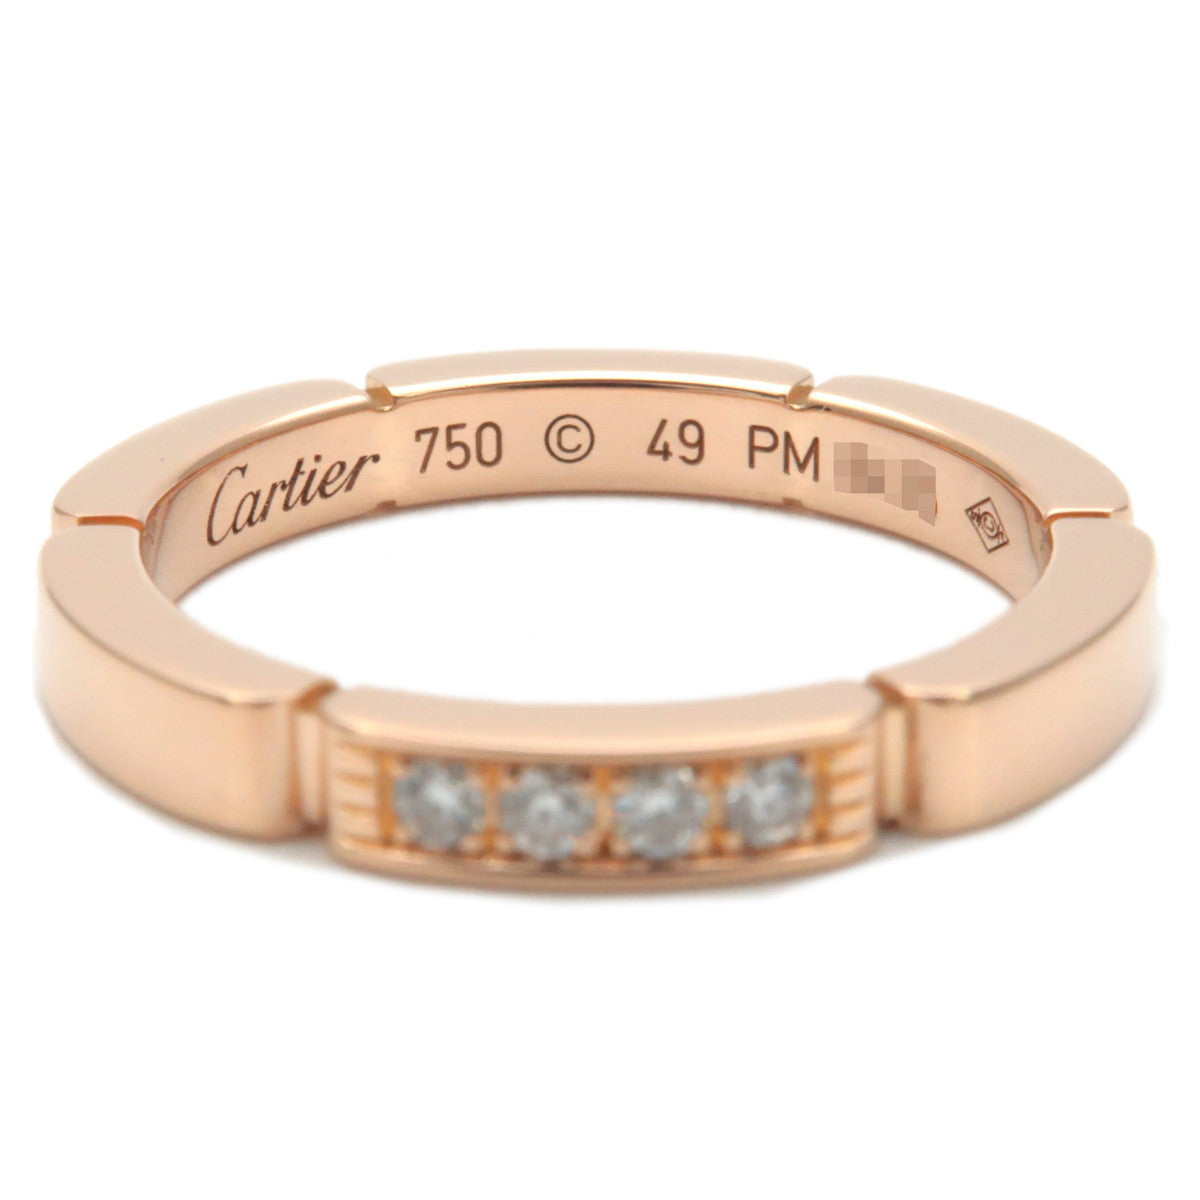 Cartier maillon Panthere 4P Diamond Ring Rose Gold #49 US5